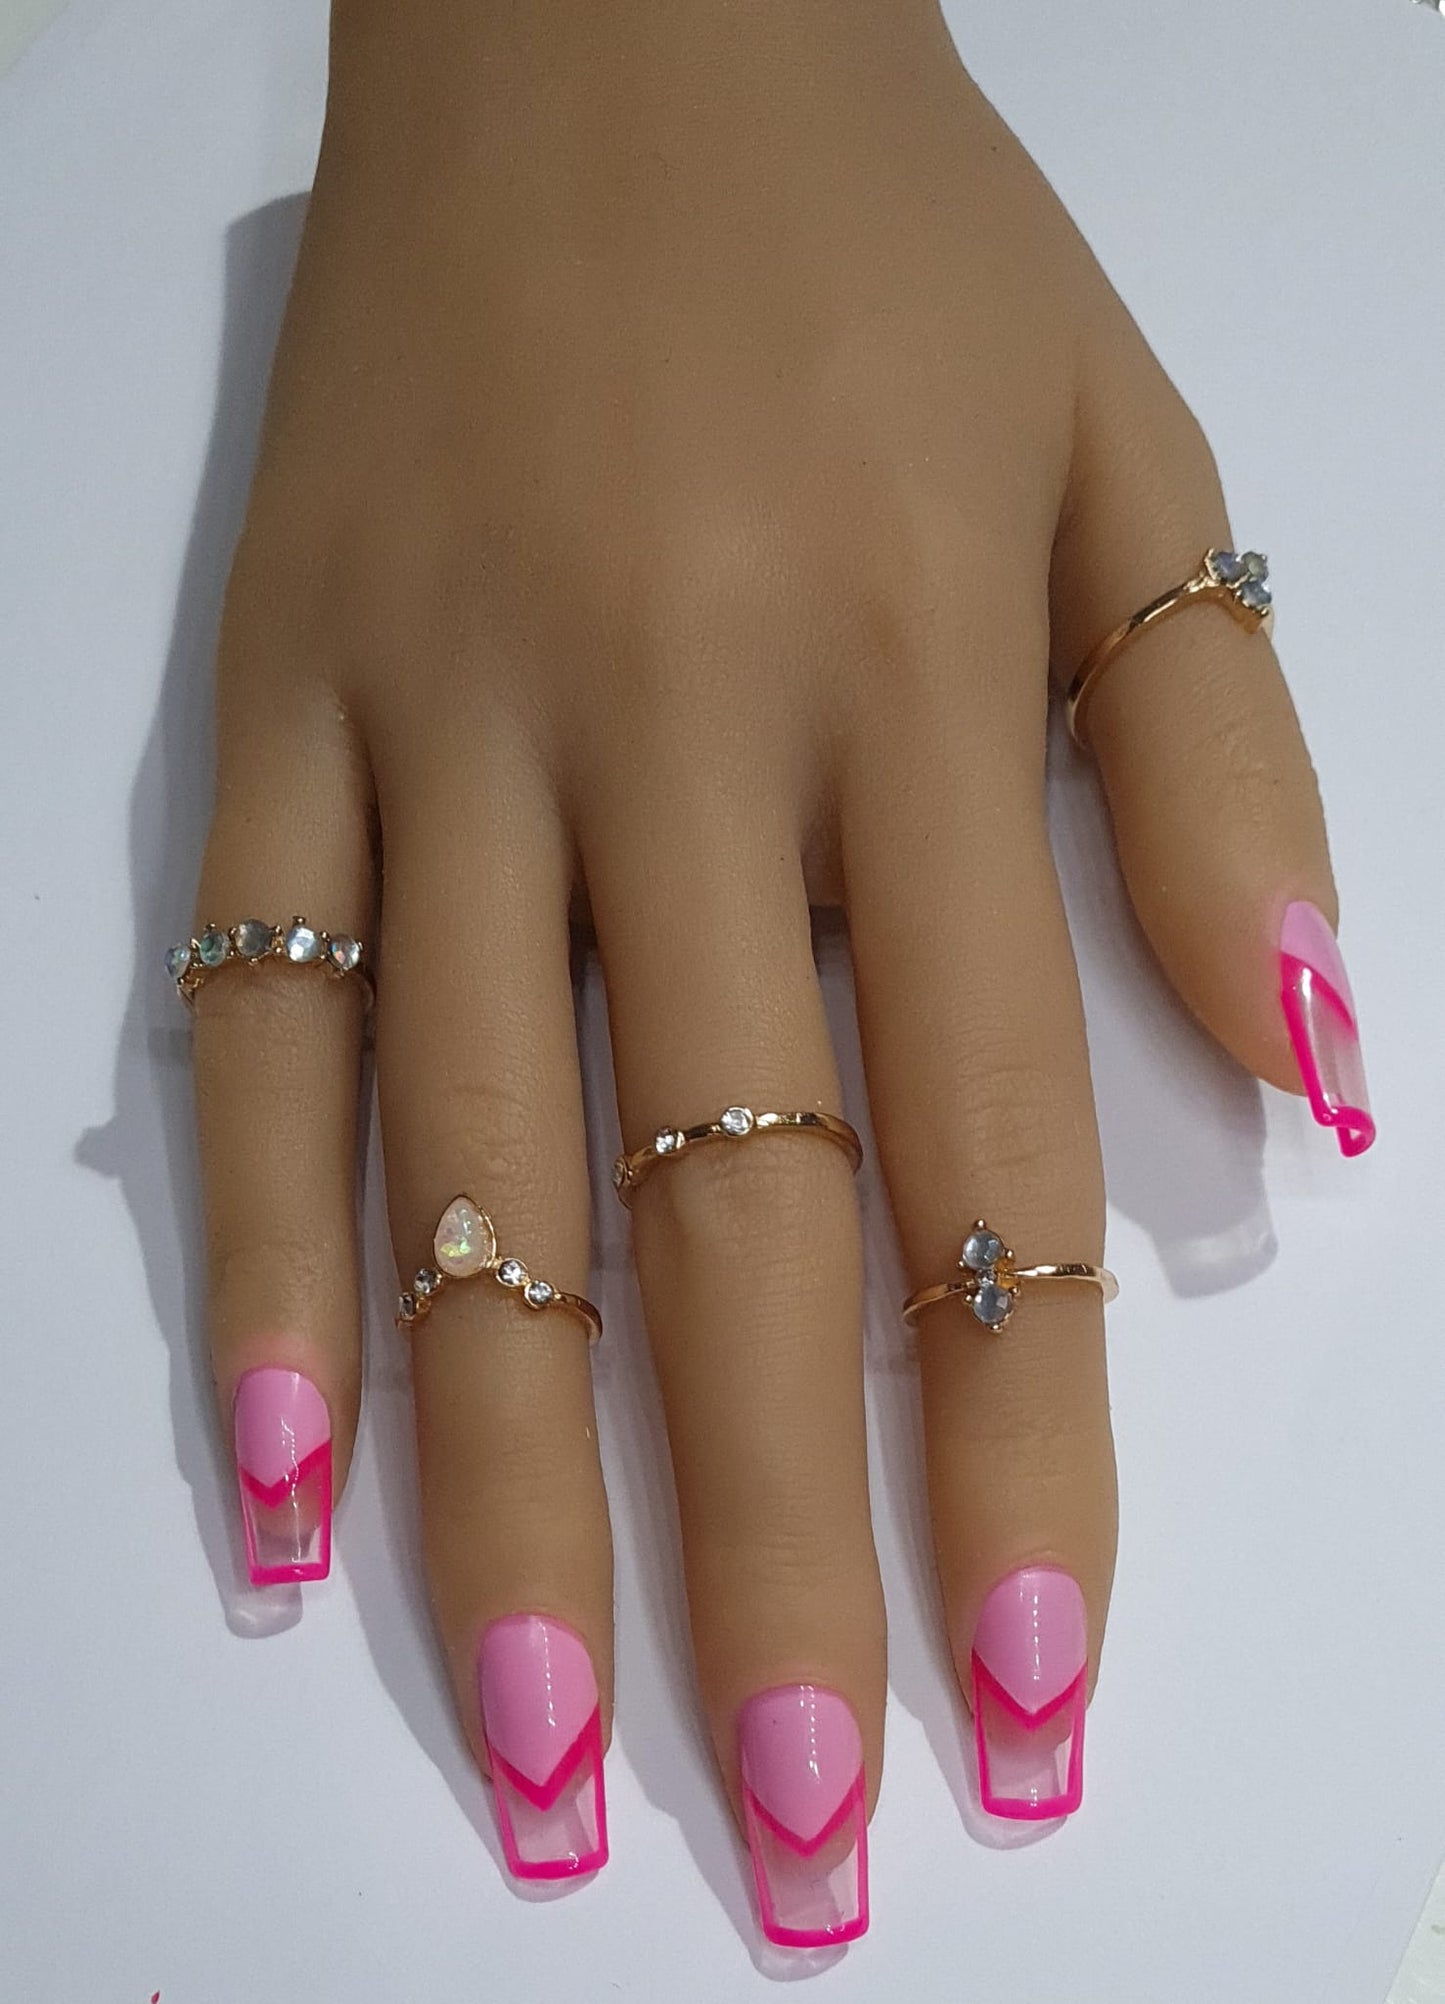 Press On Nails- Medium Square Shaped Hot Pink French Tip Spring/Summer 2023 collection full cover gel tip luxury false nails salon quality hand painted custom made uk